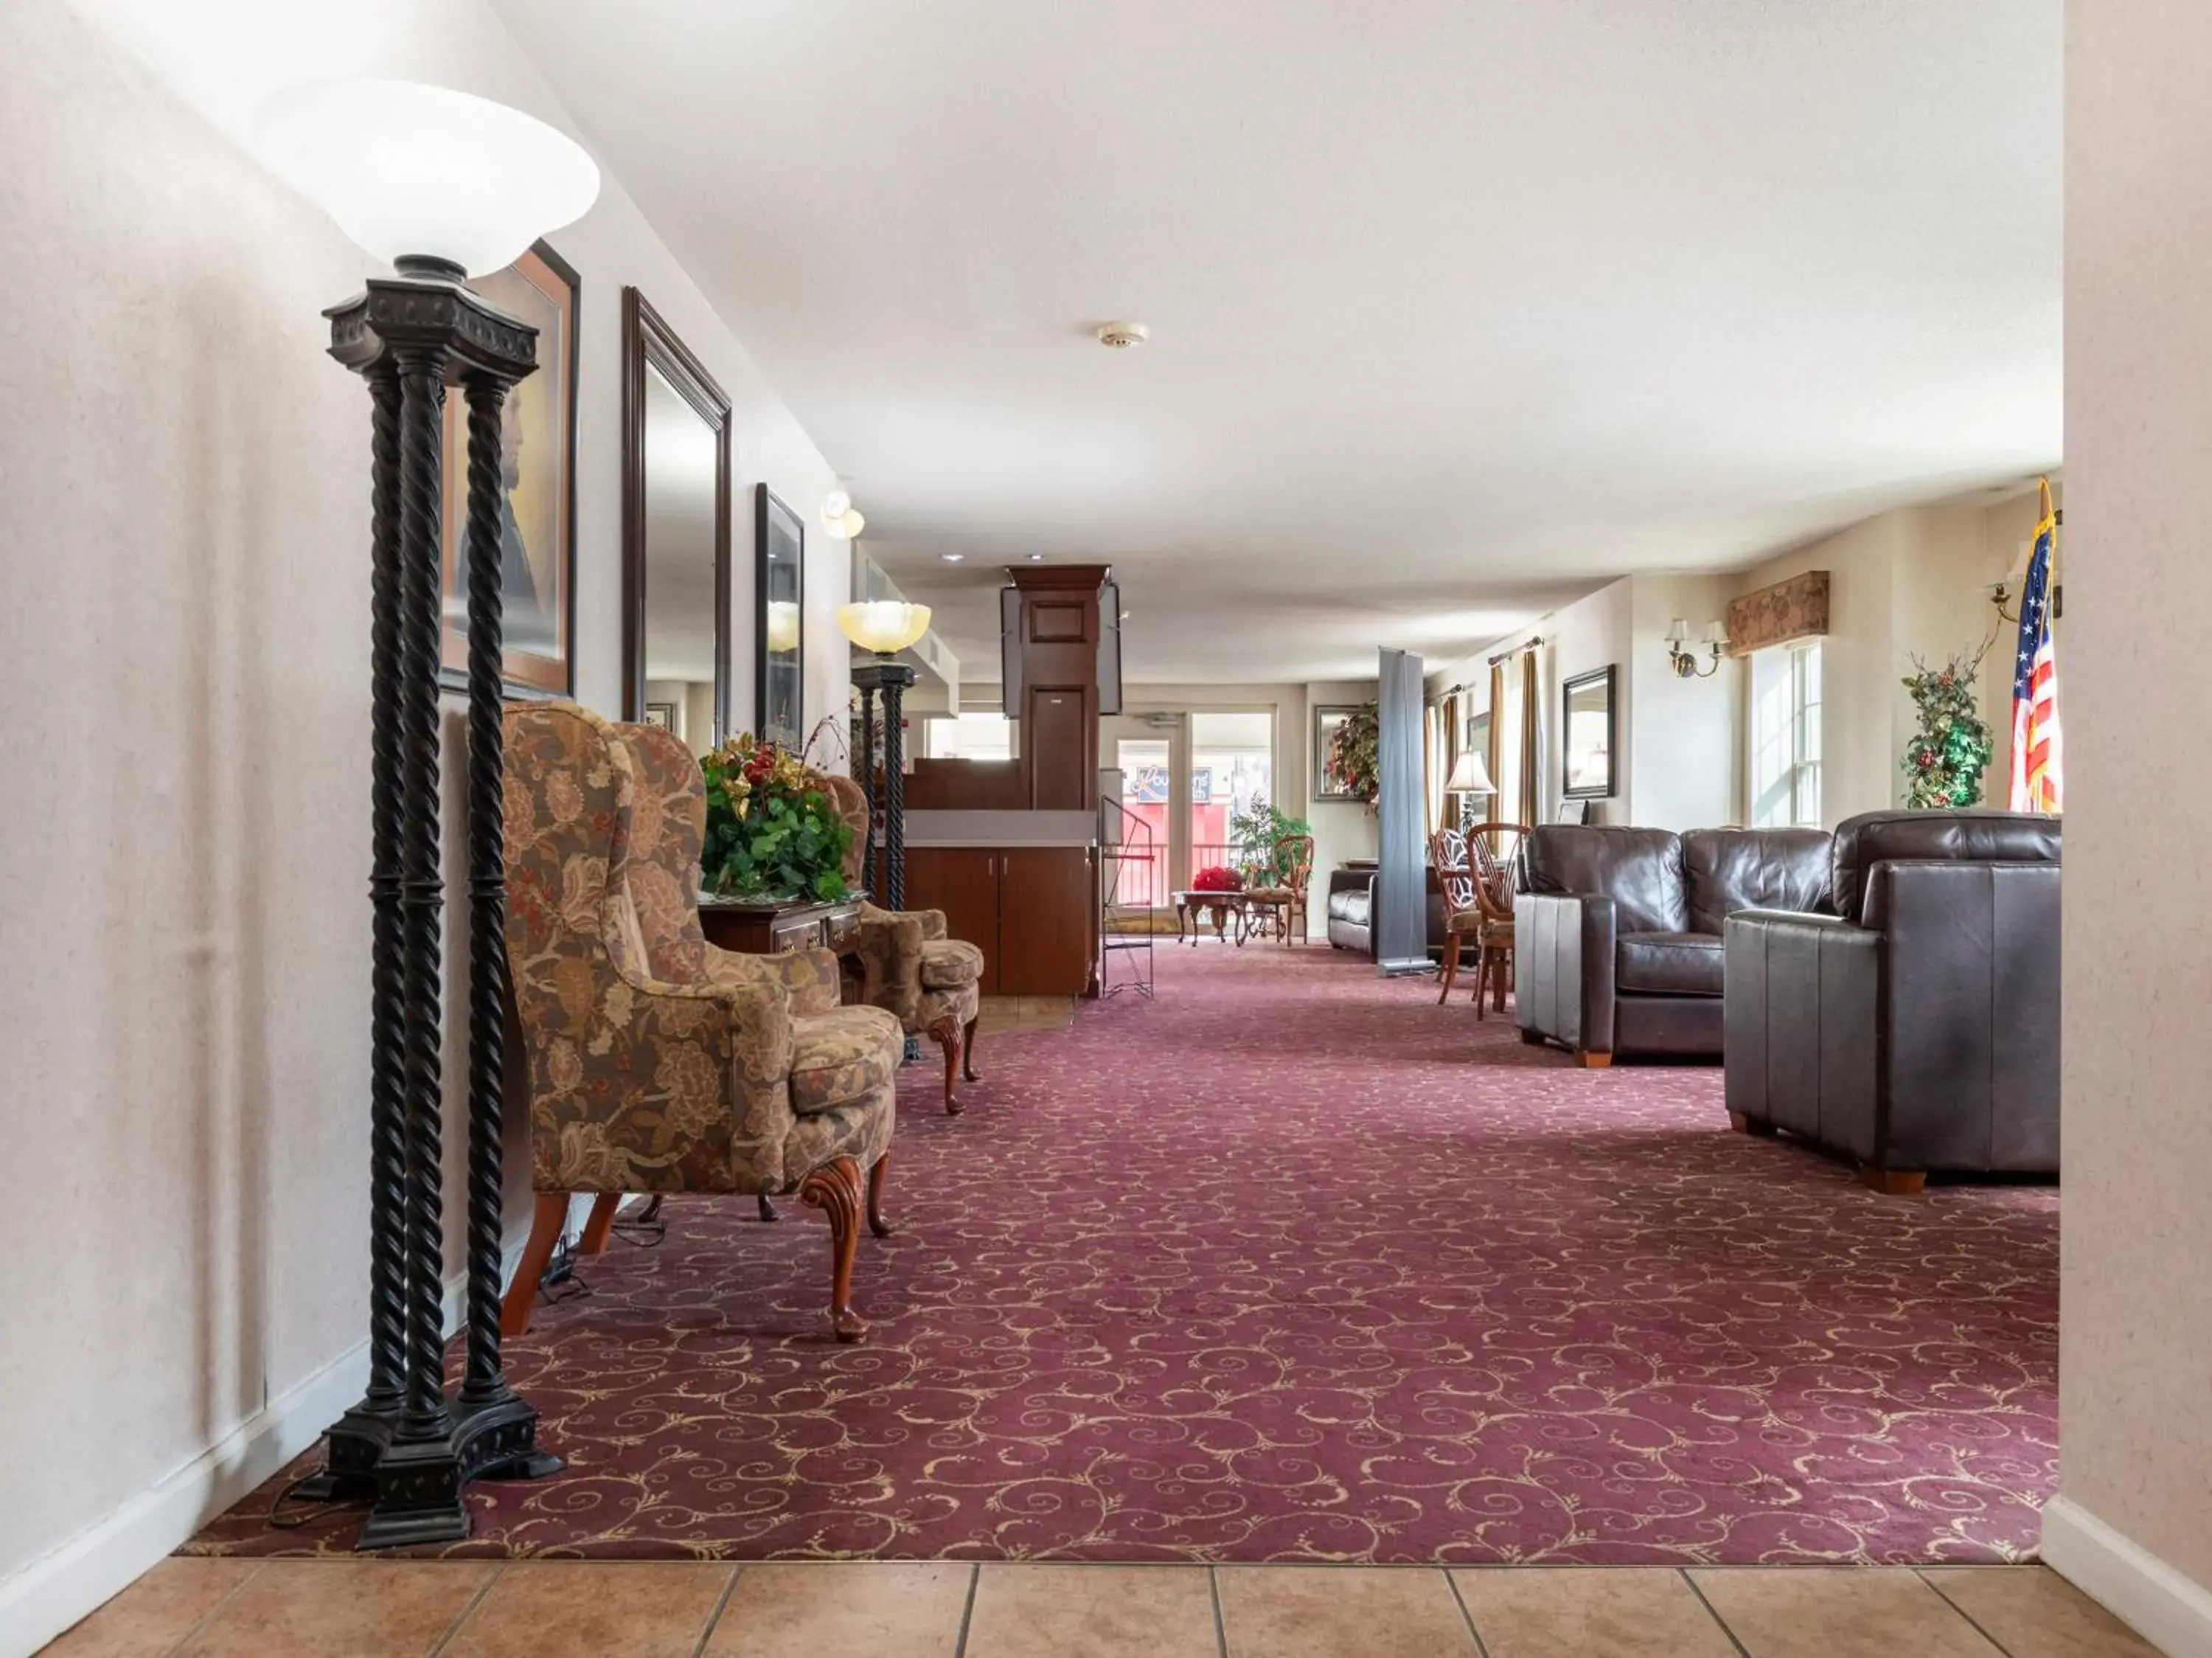 Lobby or reception, Lobby/Reception in Mansion View Inn & Suites